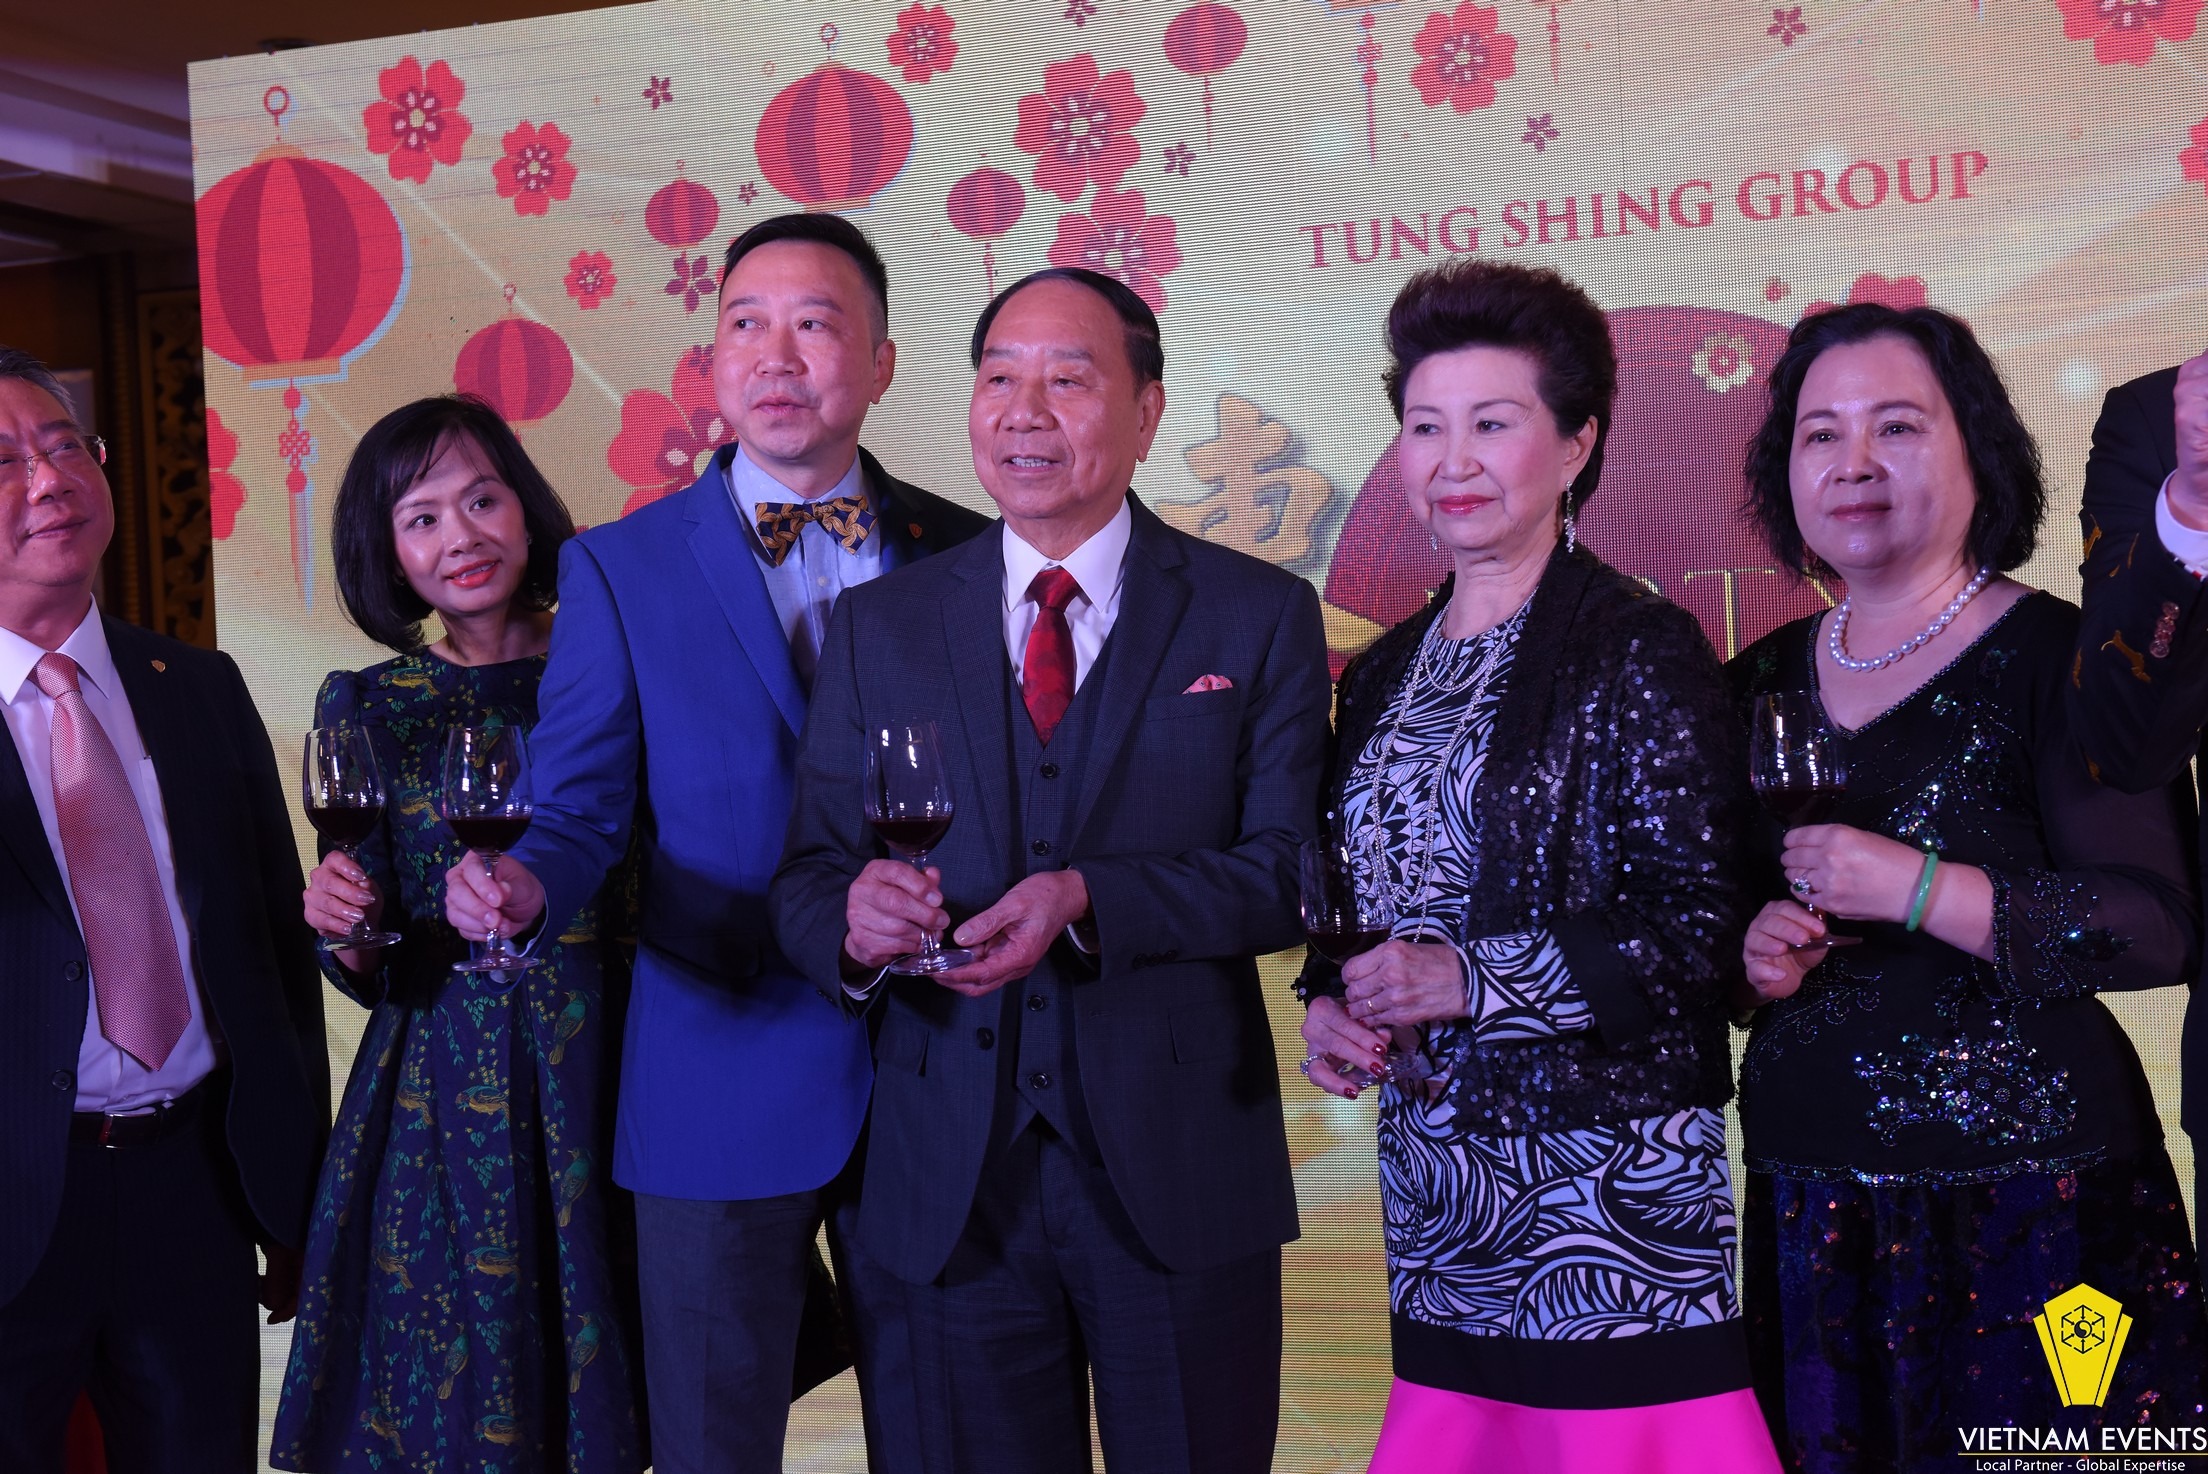 Tung Shing Group party in 2019